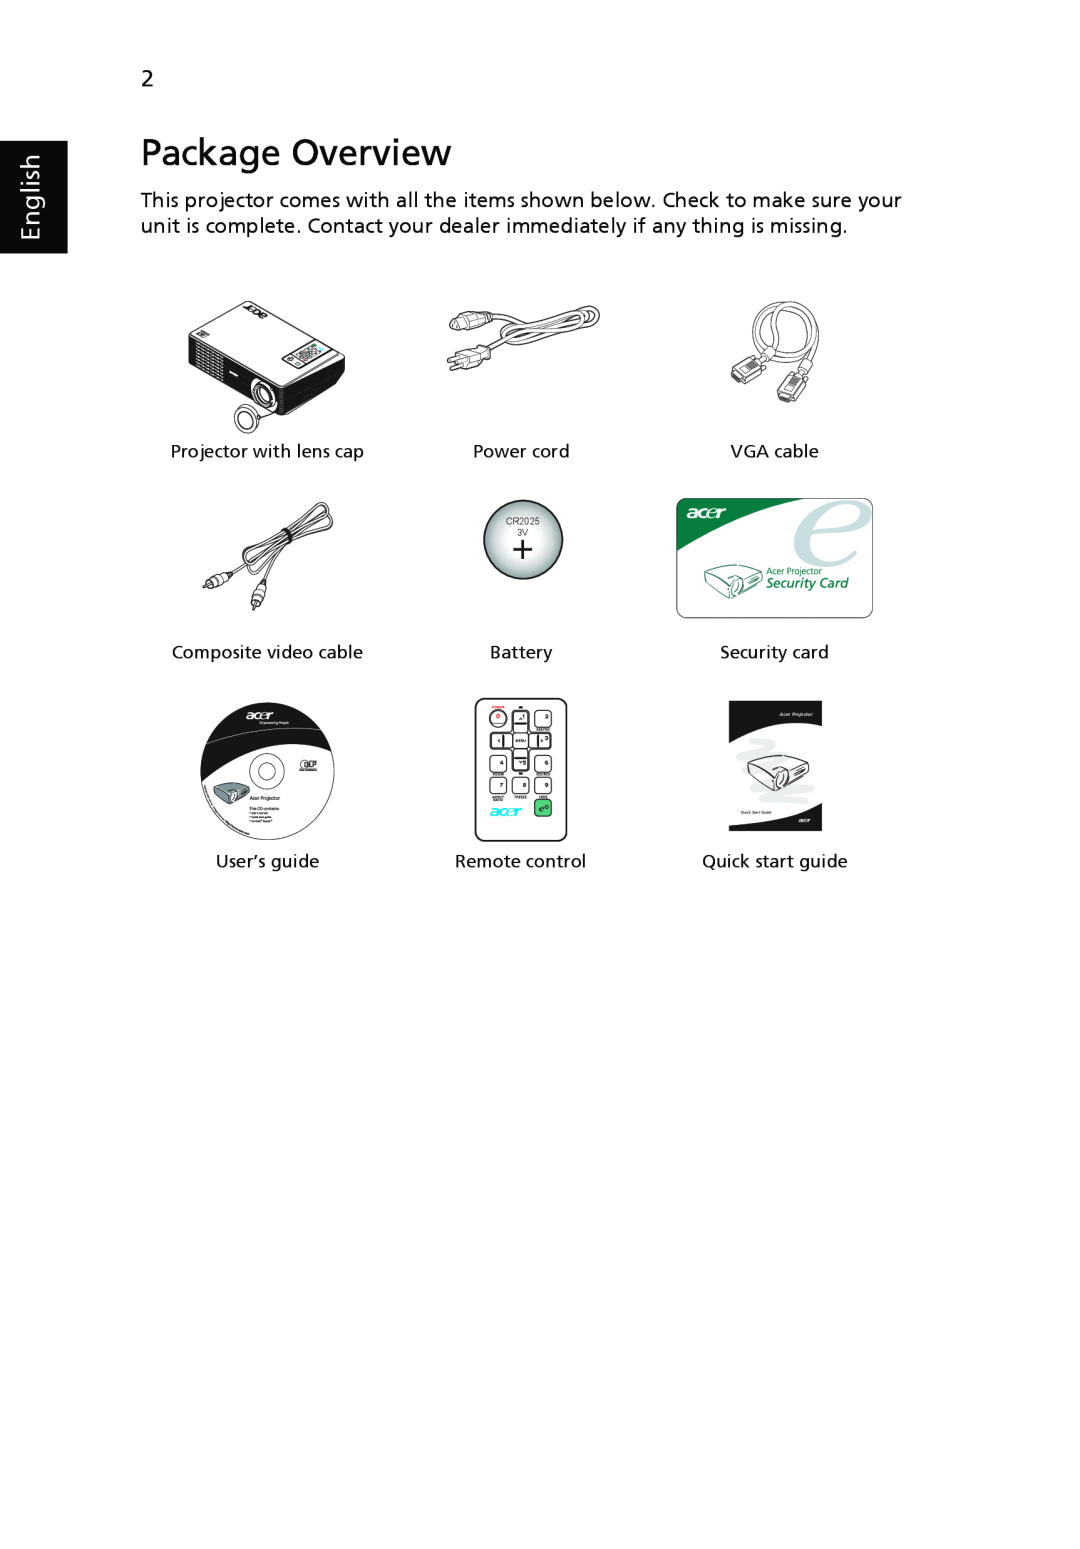 Acer H5350 manual Package Overview, English, CR2025 3V, Acer Projector, Quick Start Guide 